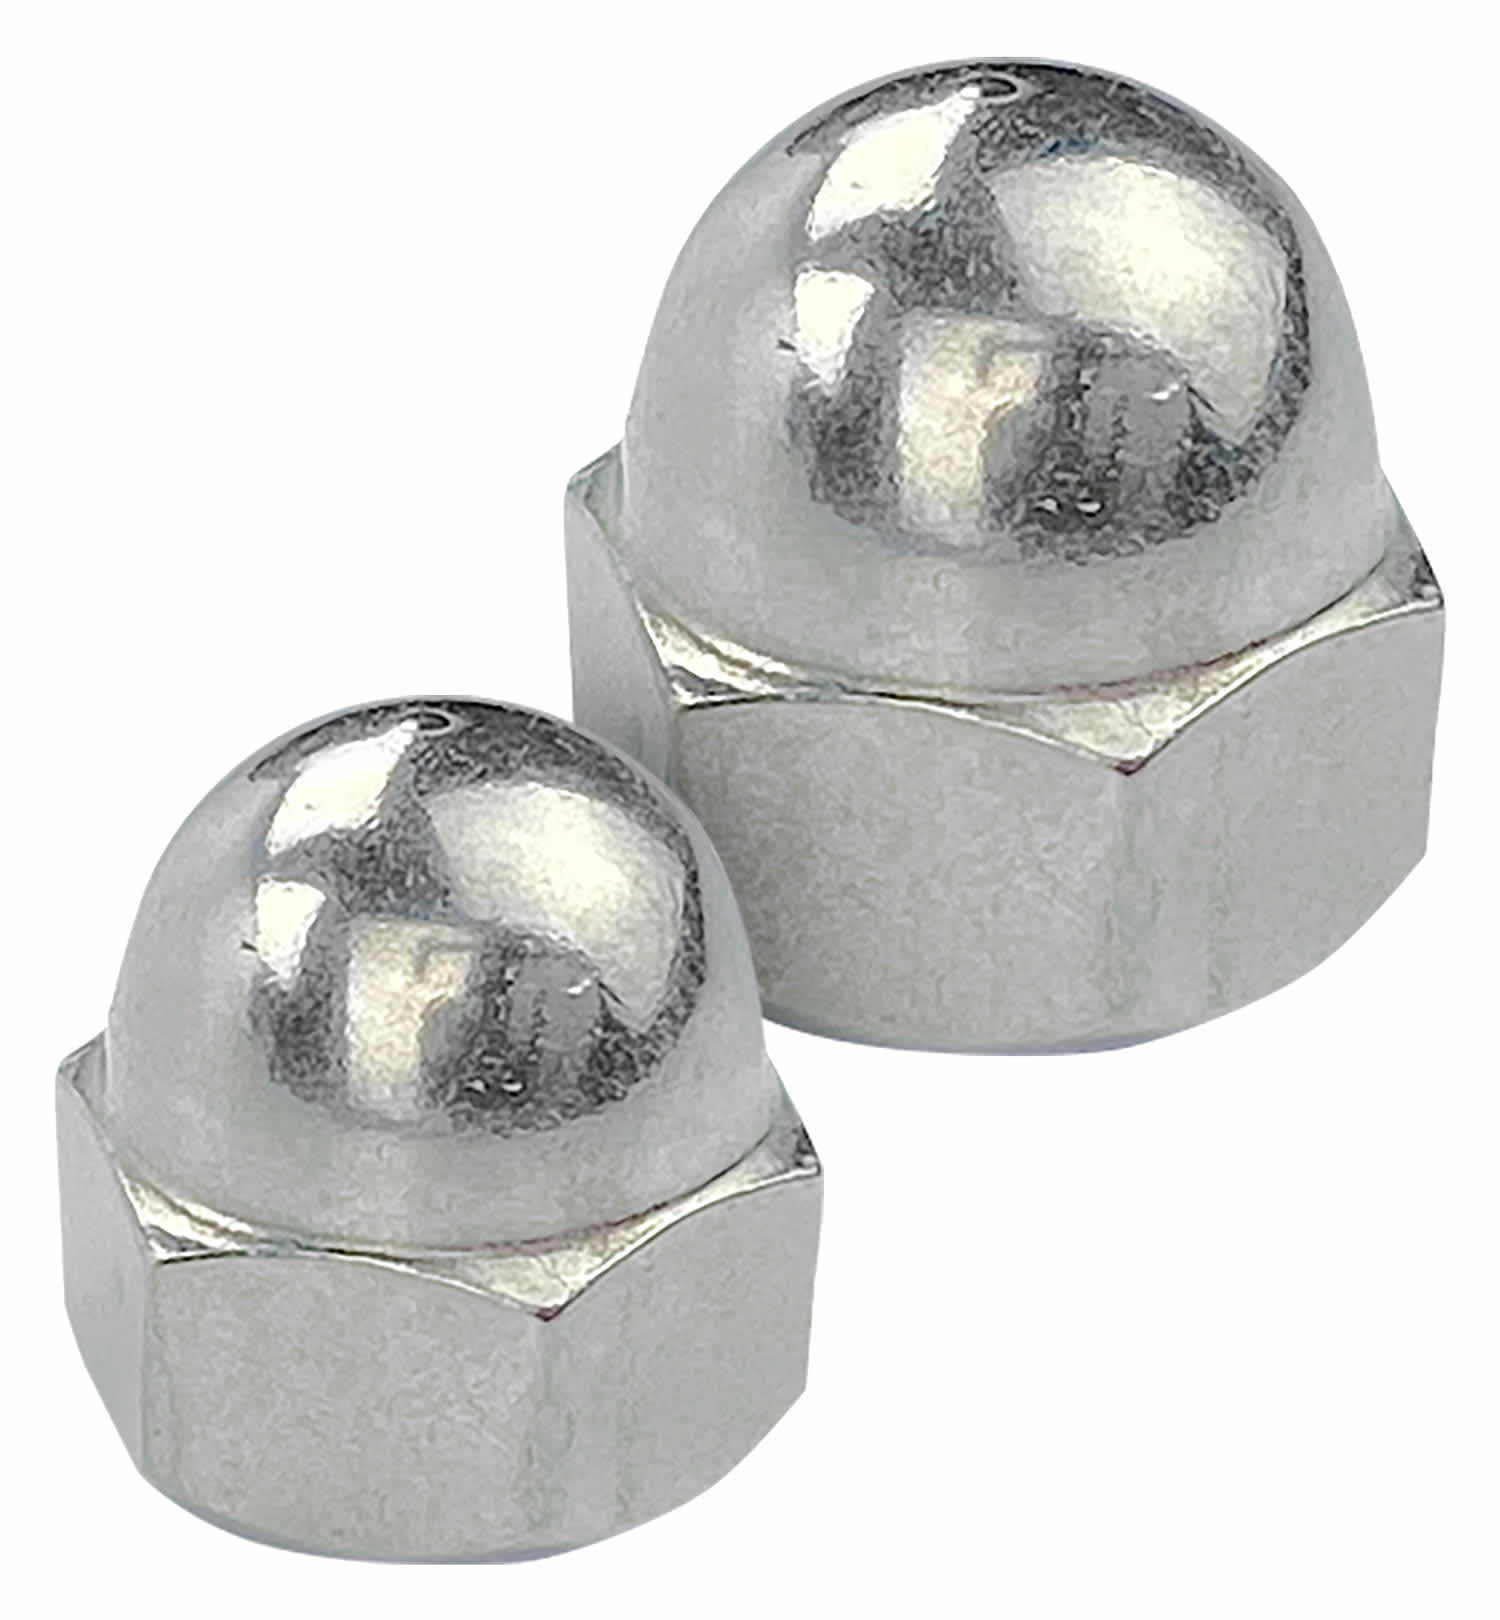 Bass Pro Shops® Stainless Steel Acorn Cap Nuts